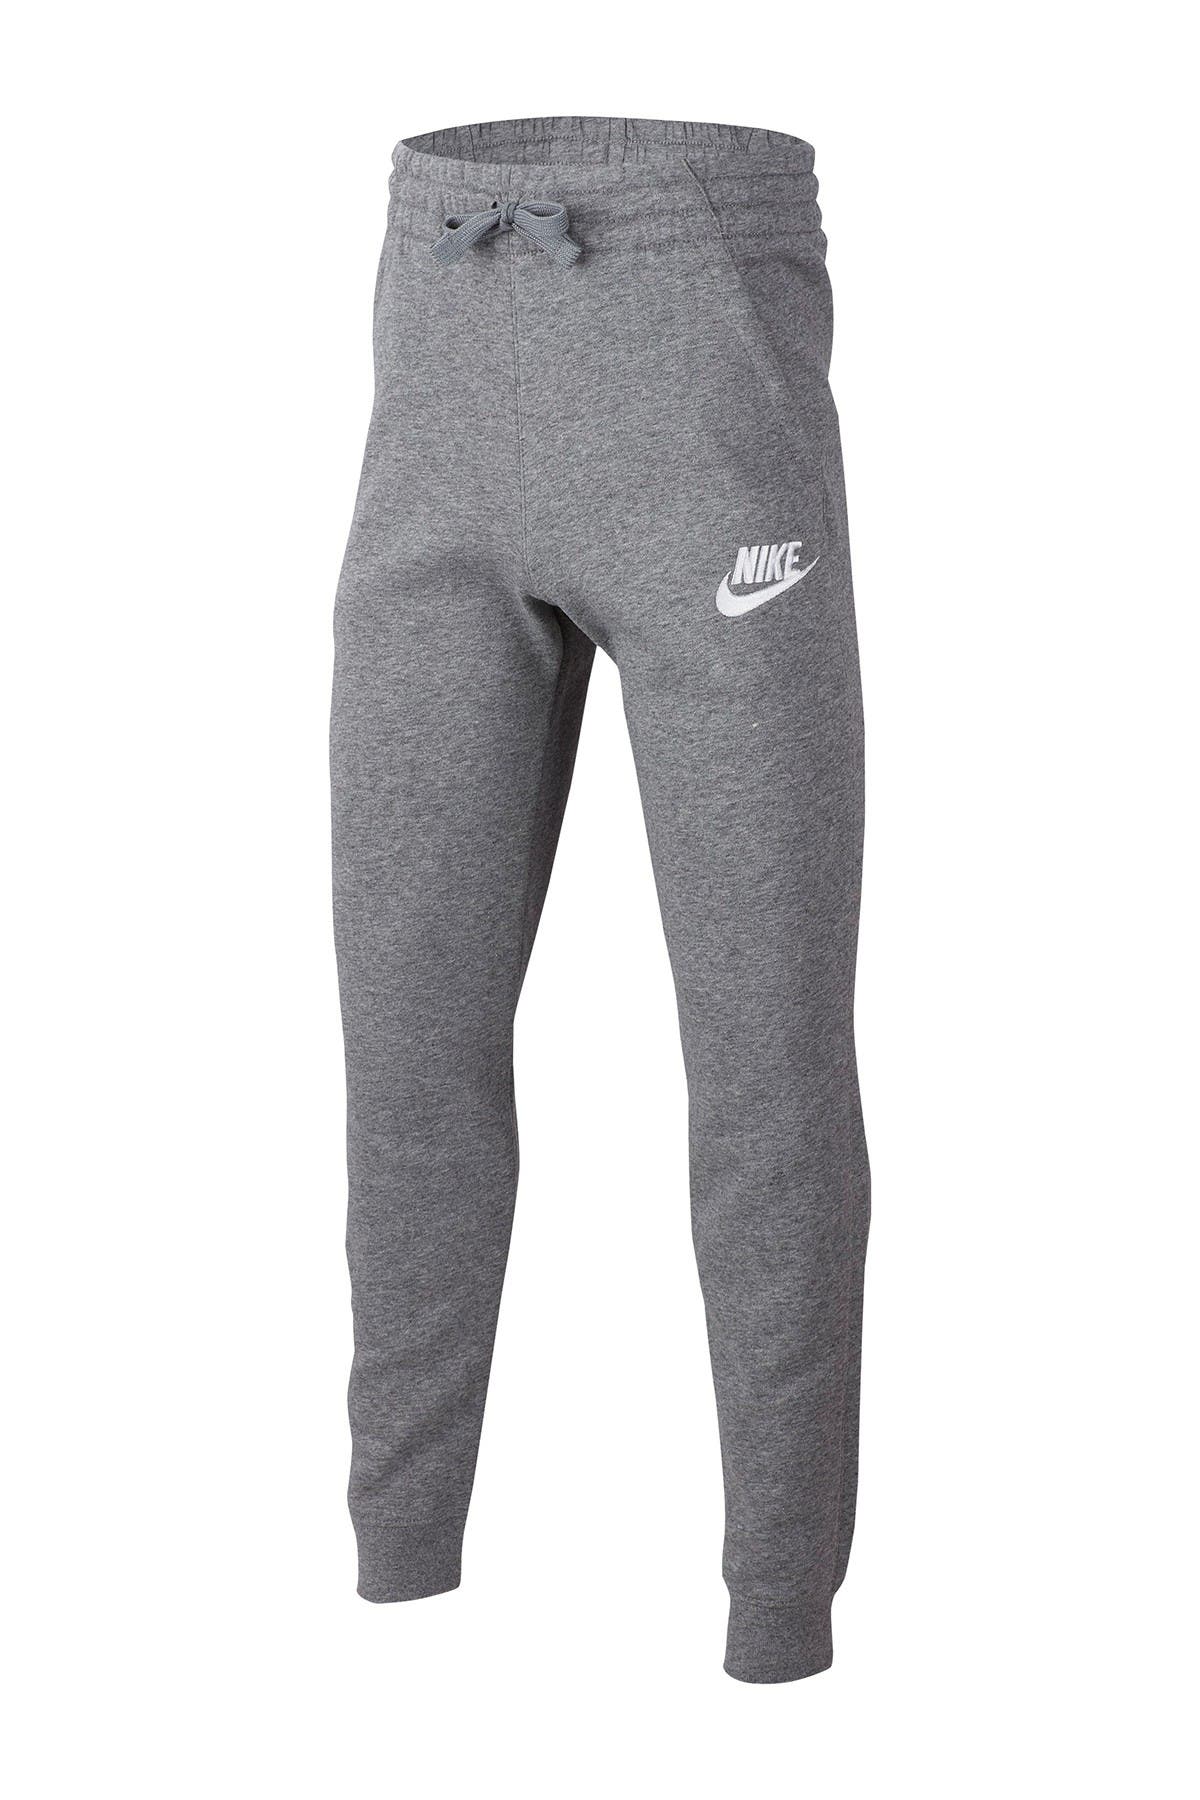 how much are nike joggers